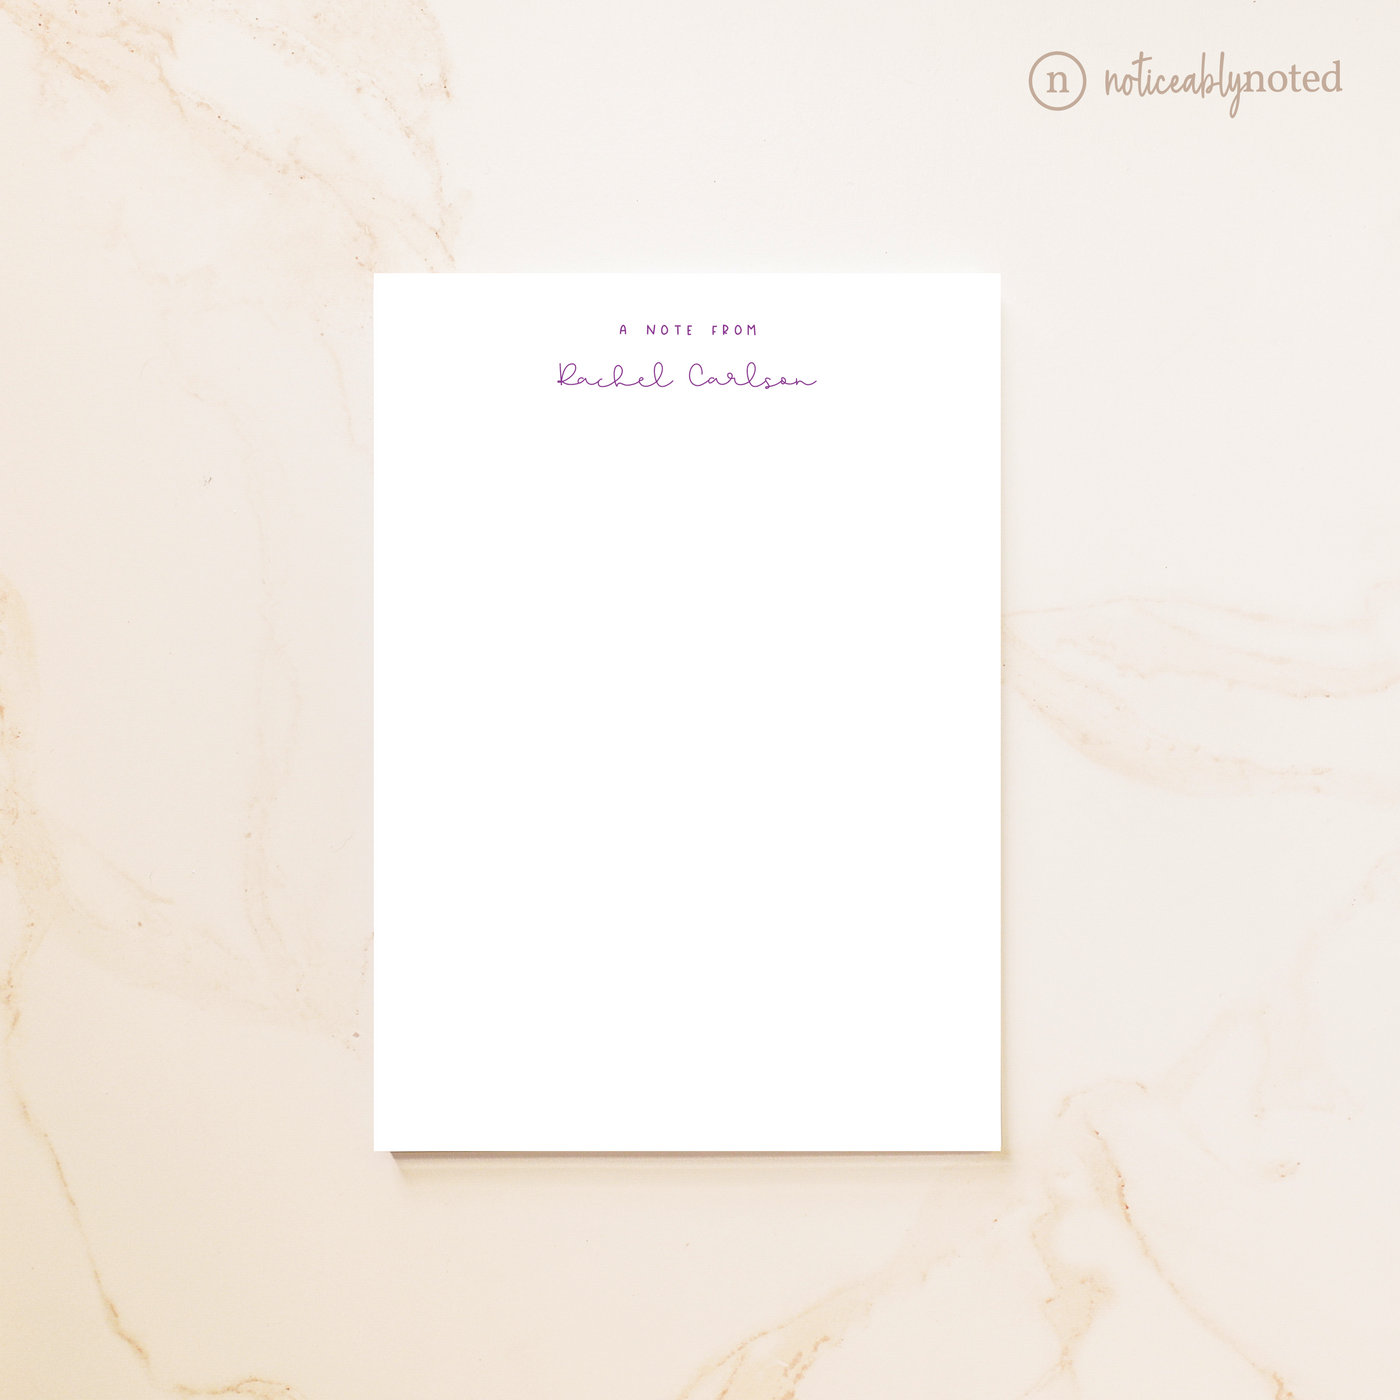 A Note From Personalized Notepad | Noticeably Noted